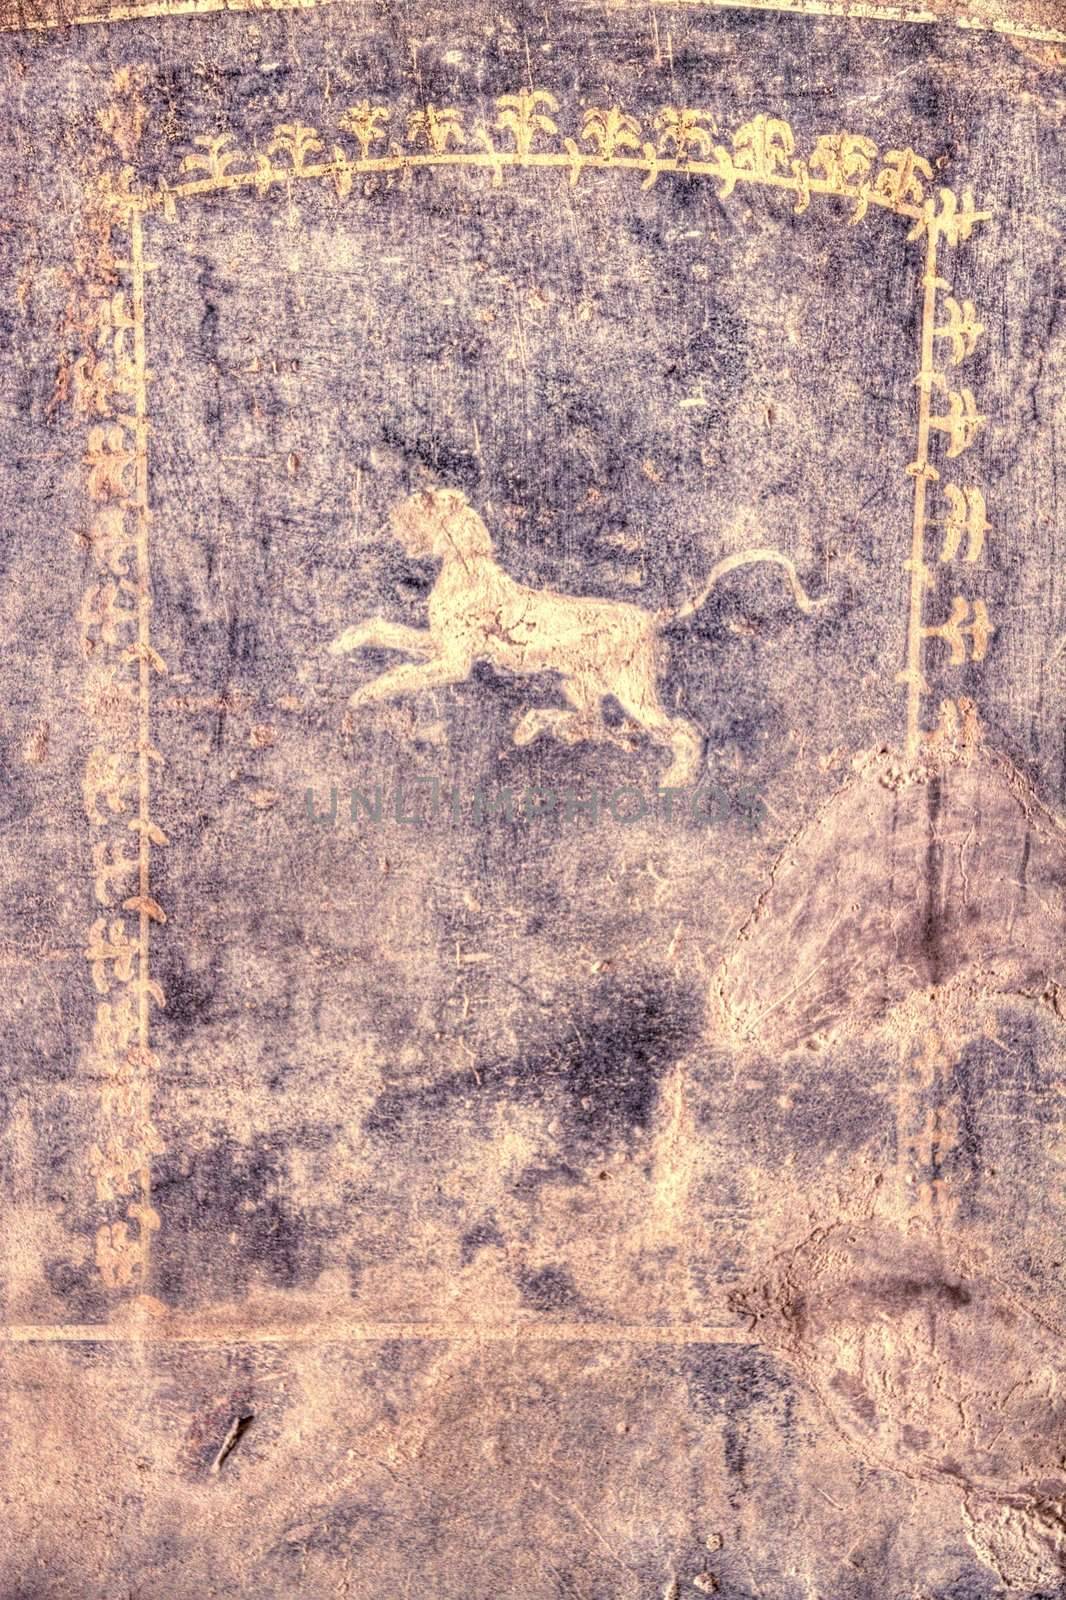 Deatil color image of a fresco from the ancient city of Pompeii.